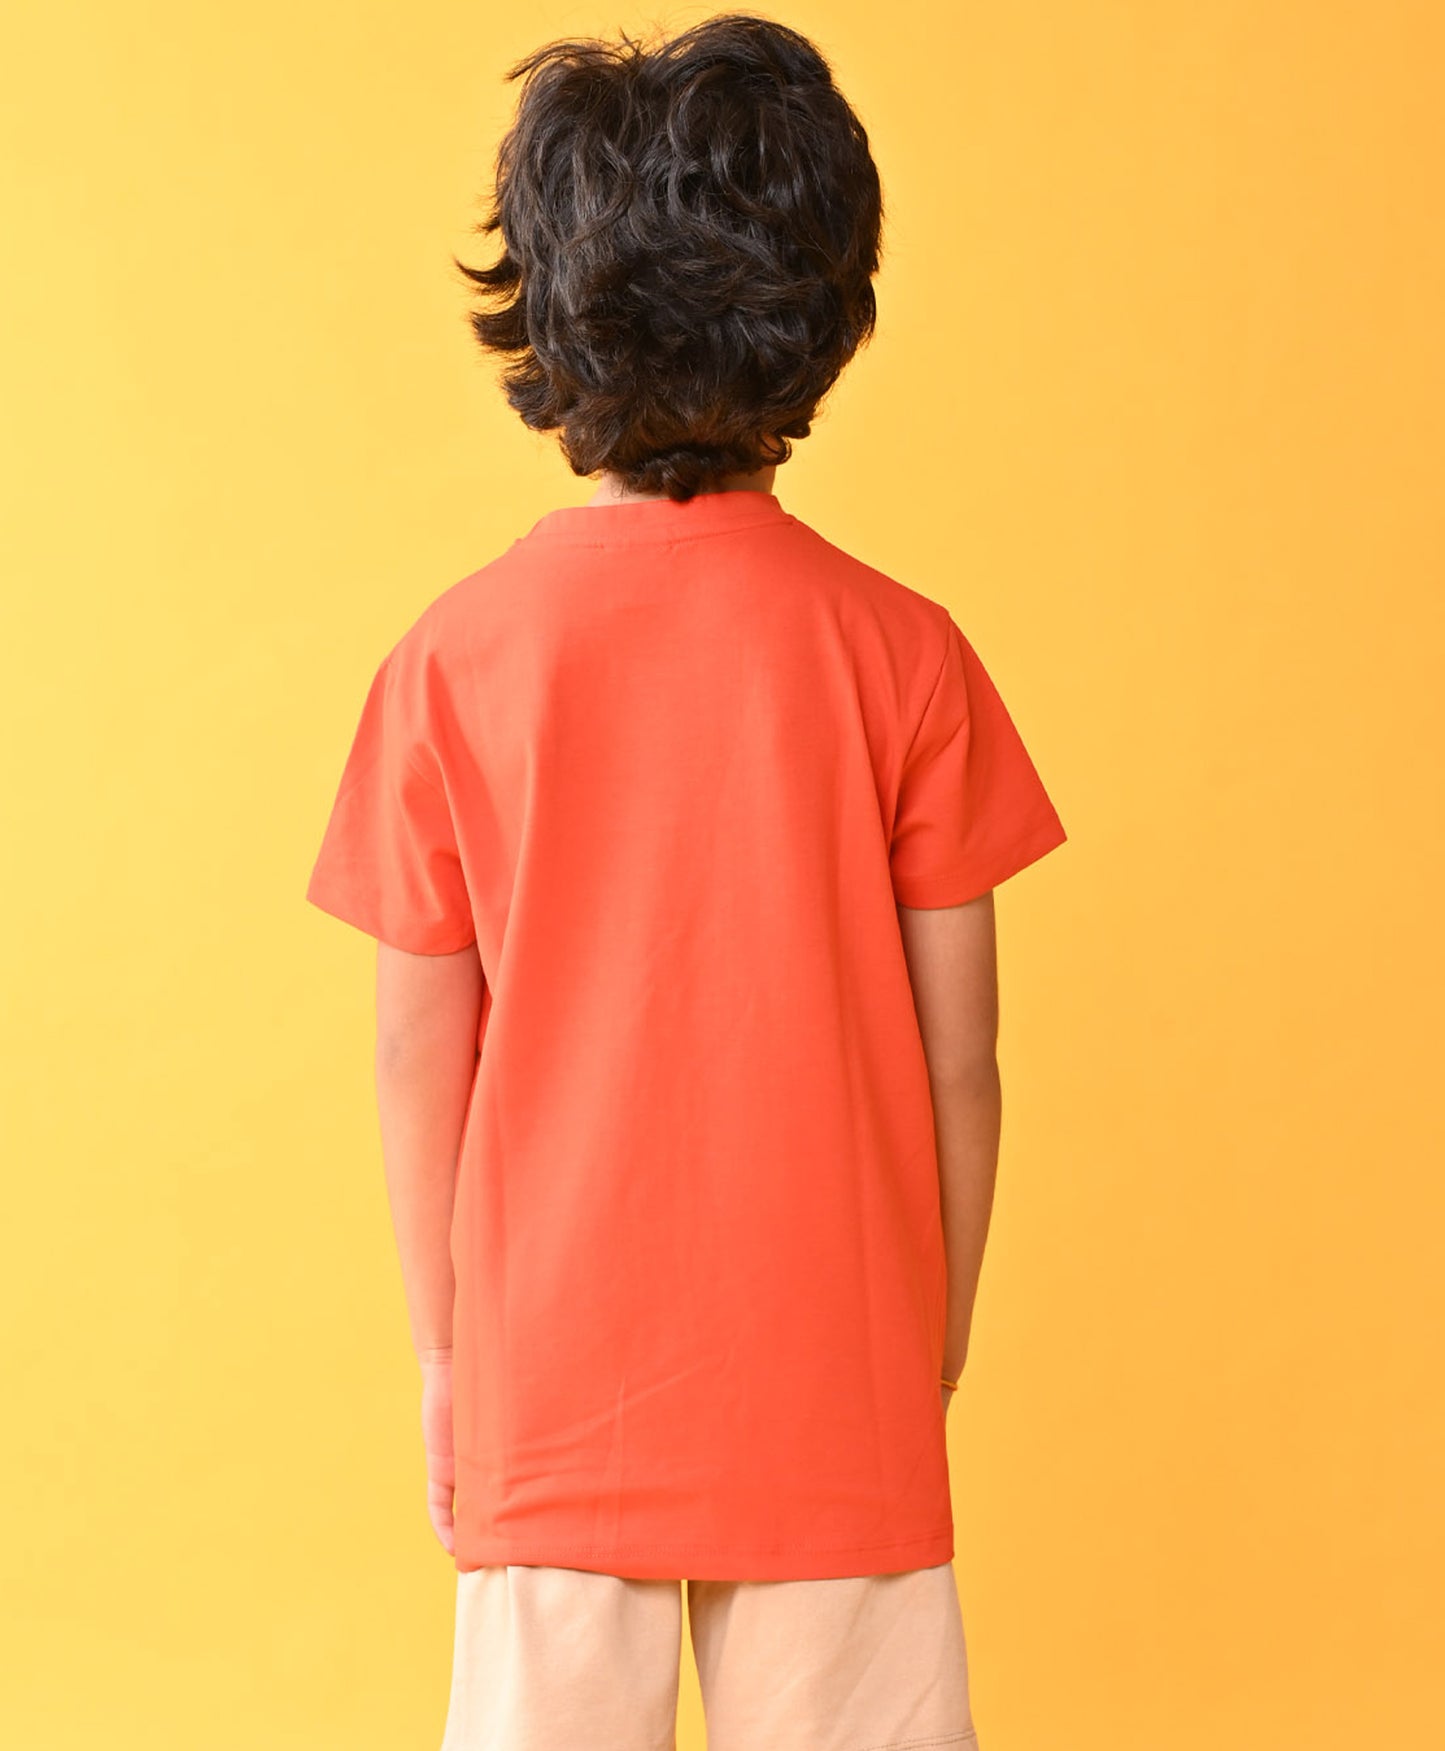 ITS TIME TO CHILL SHORT SLEEVE BOYS T-SHIRT - ORANGE